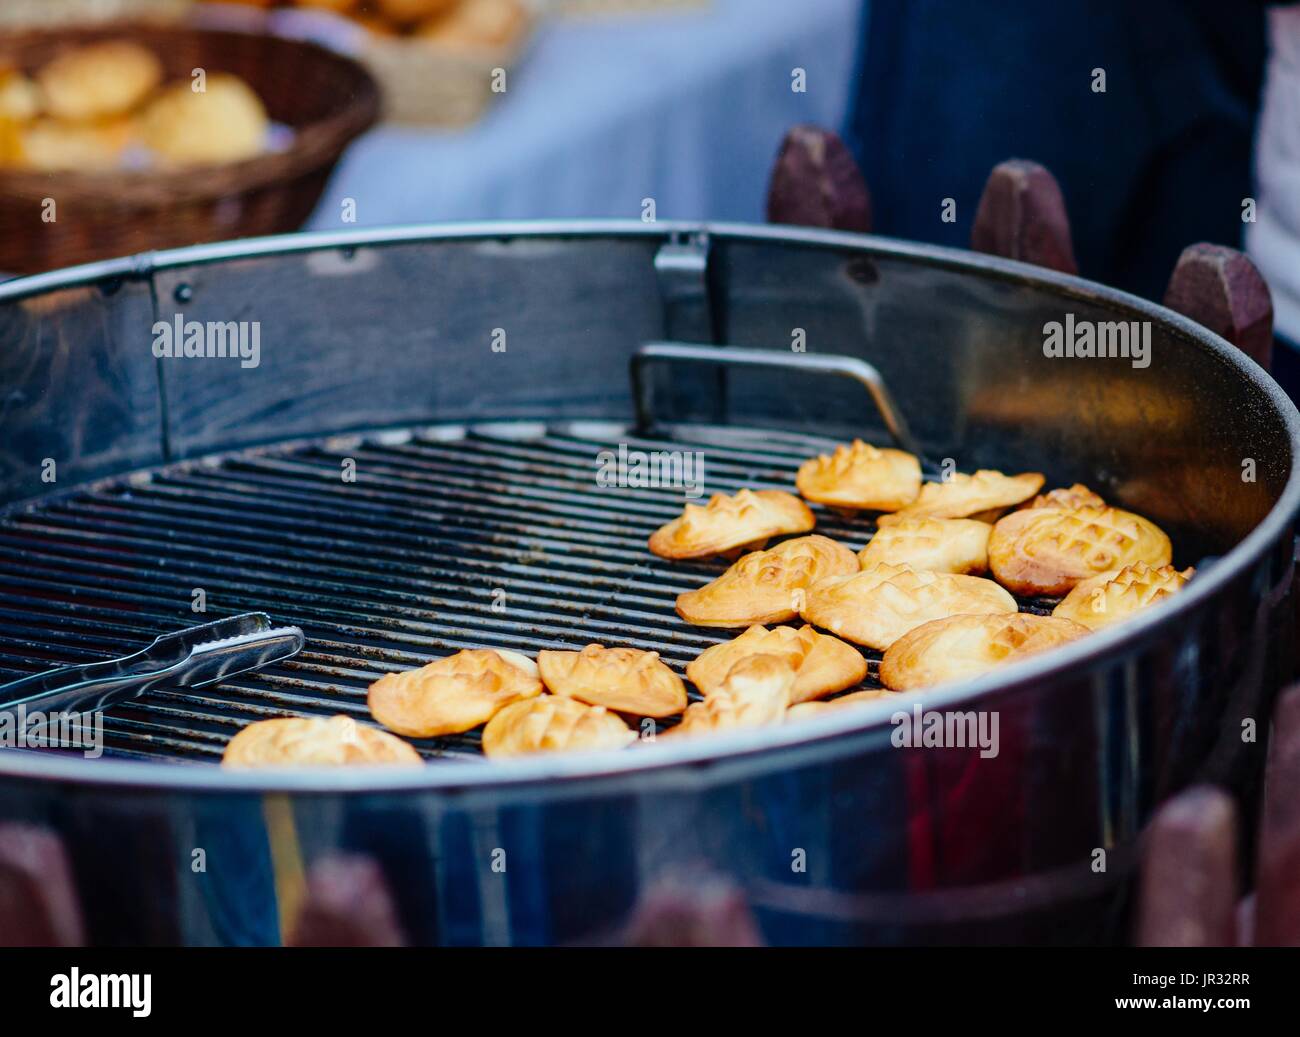 Grilled polish traditional smoked cheese made of salted sheep milk called oscypek Stock Photo